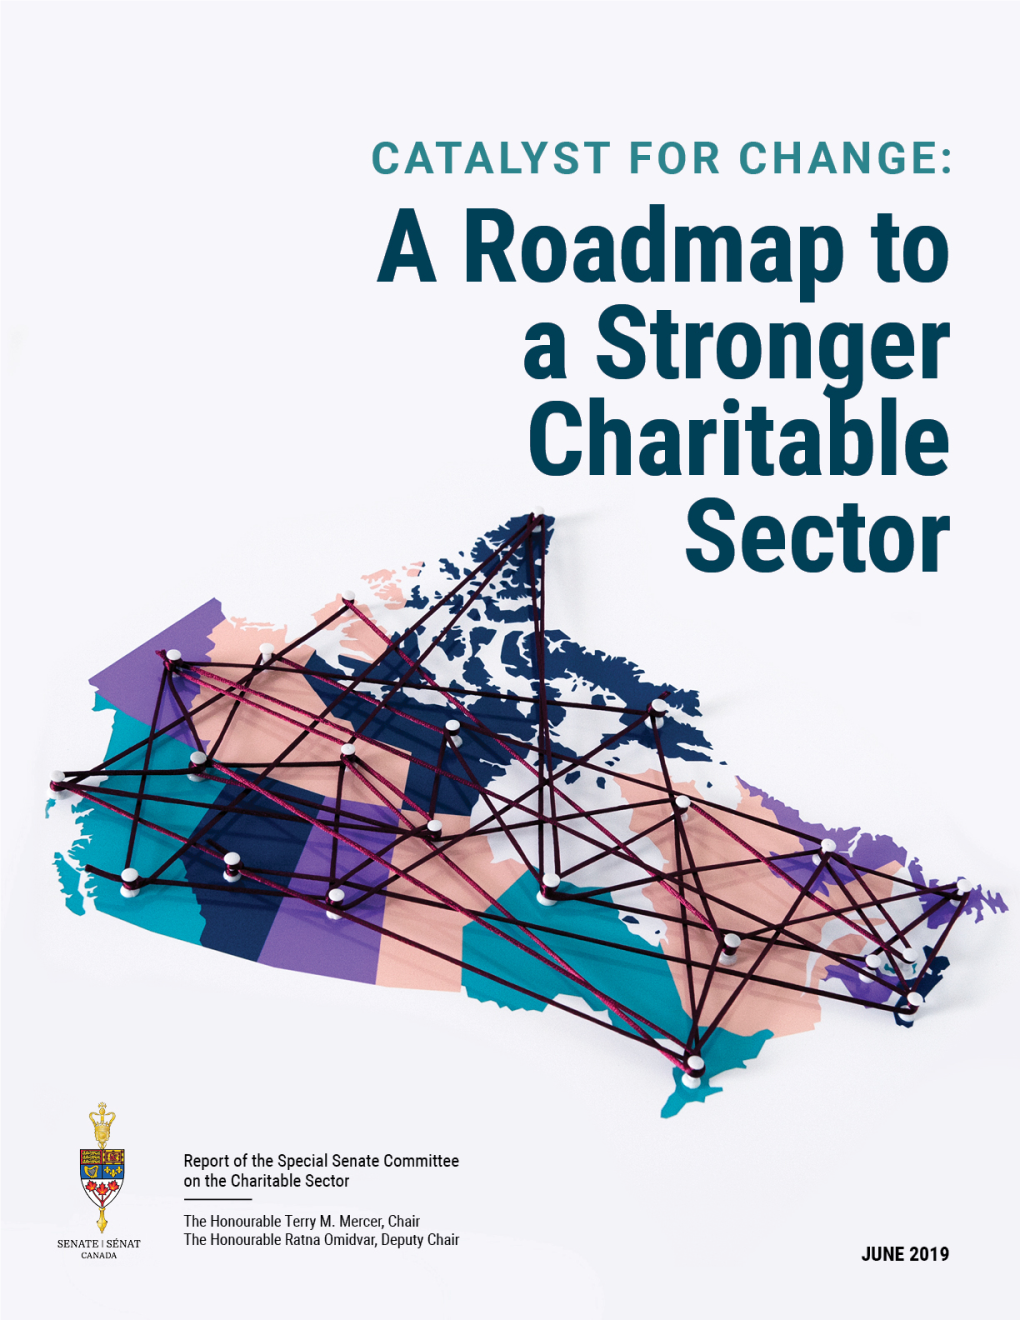 A Roadmap to a Stronger Charitable Sector